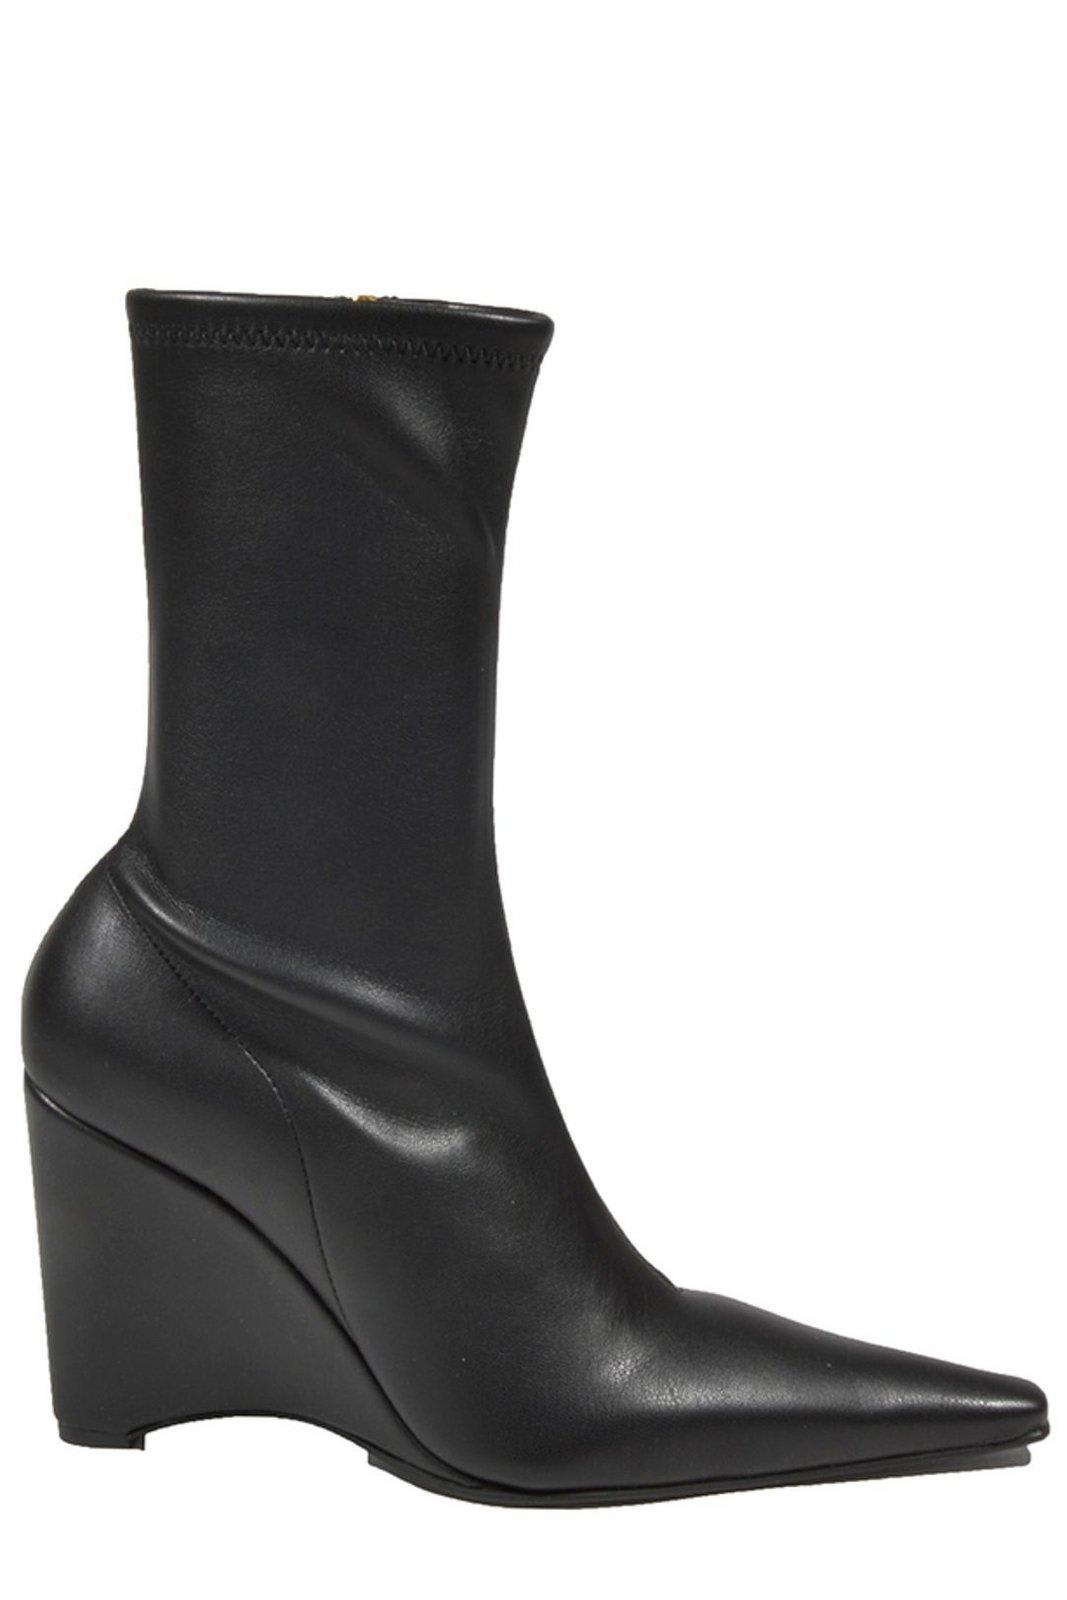 J.W. Anderson Wedge Zipped Boots